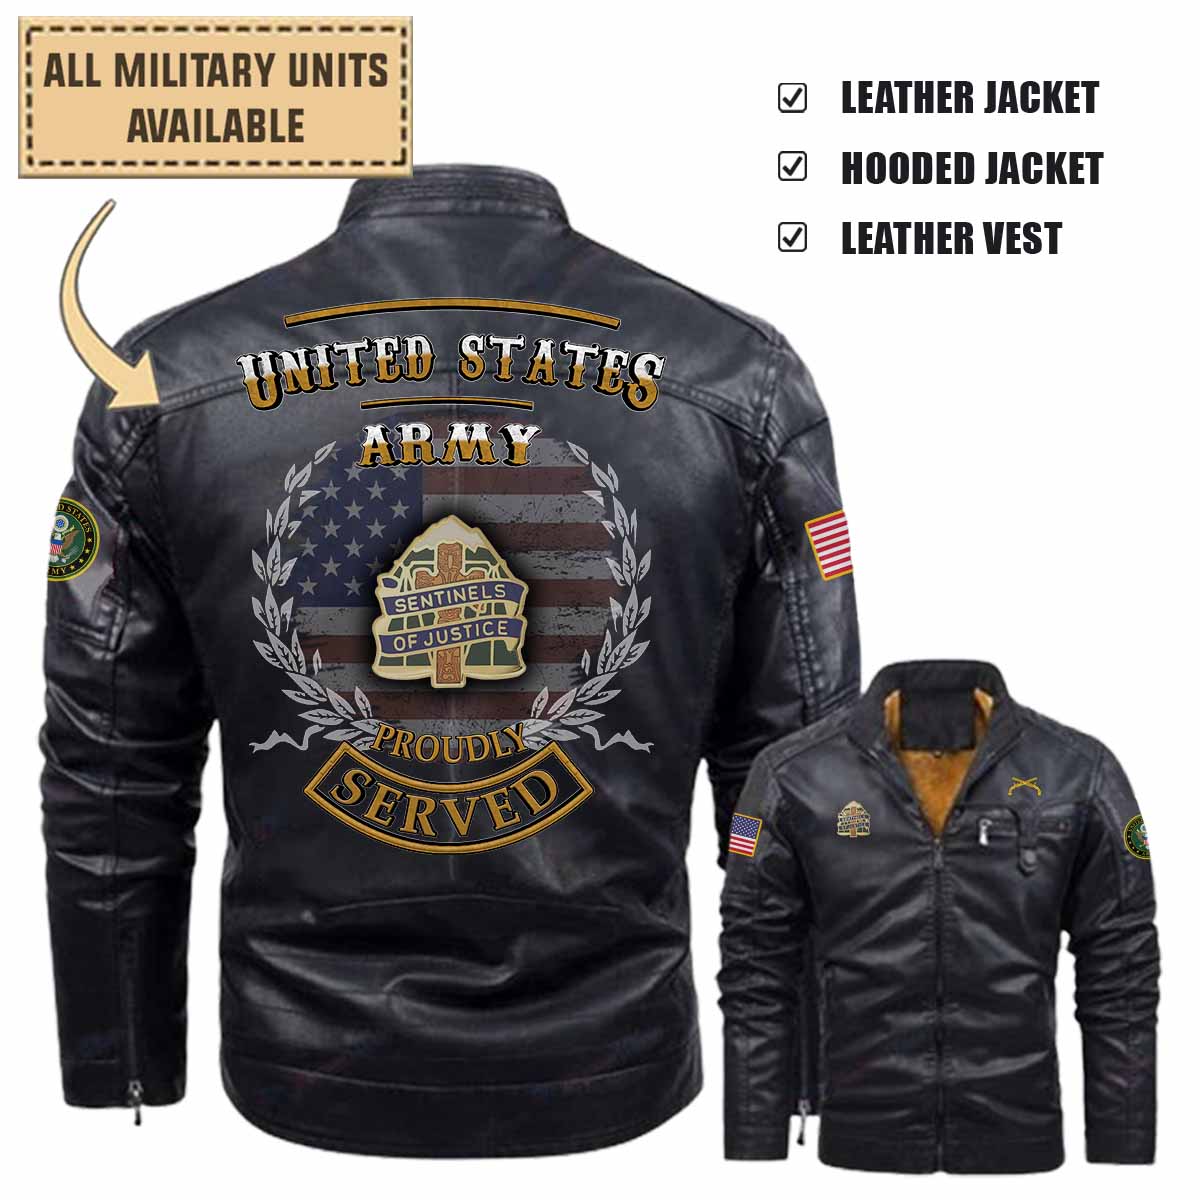 704th MP BN 704th Military Police Battalion_Military Leather Jacket and Vest